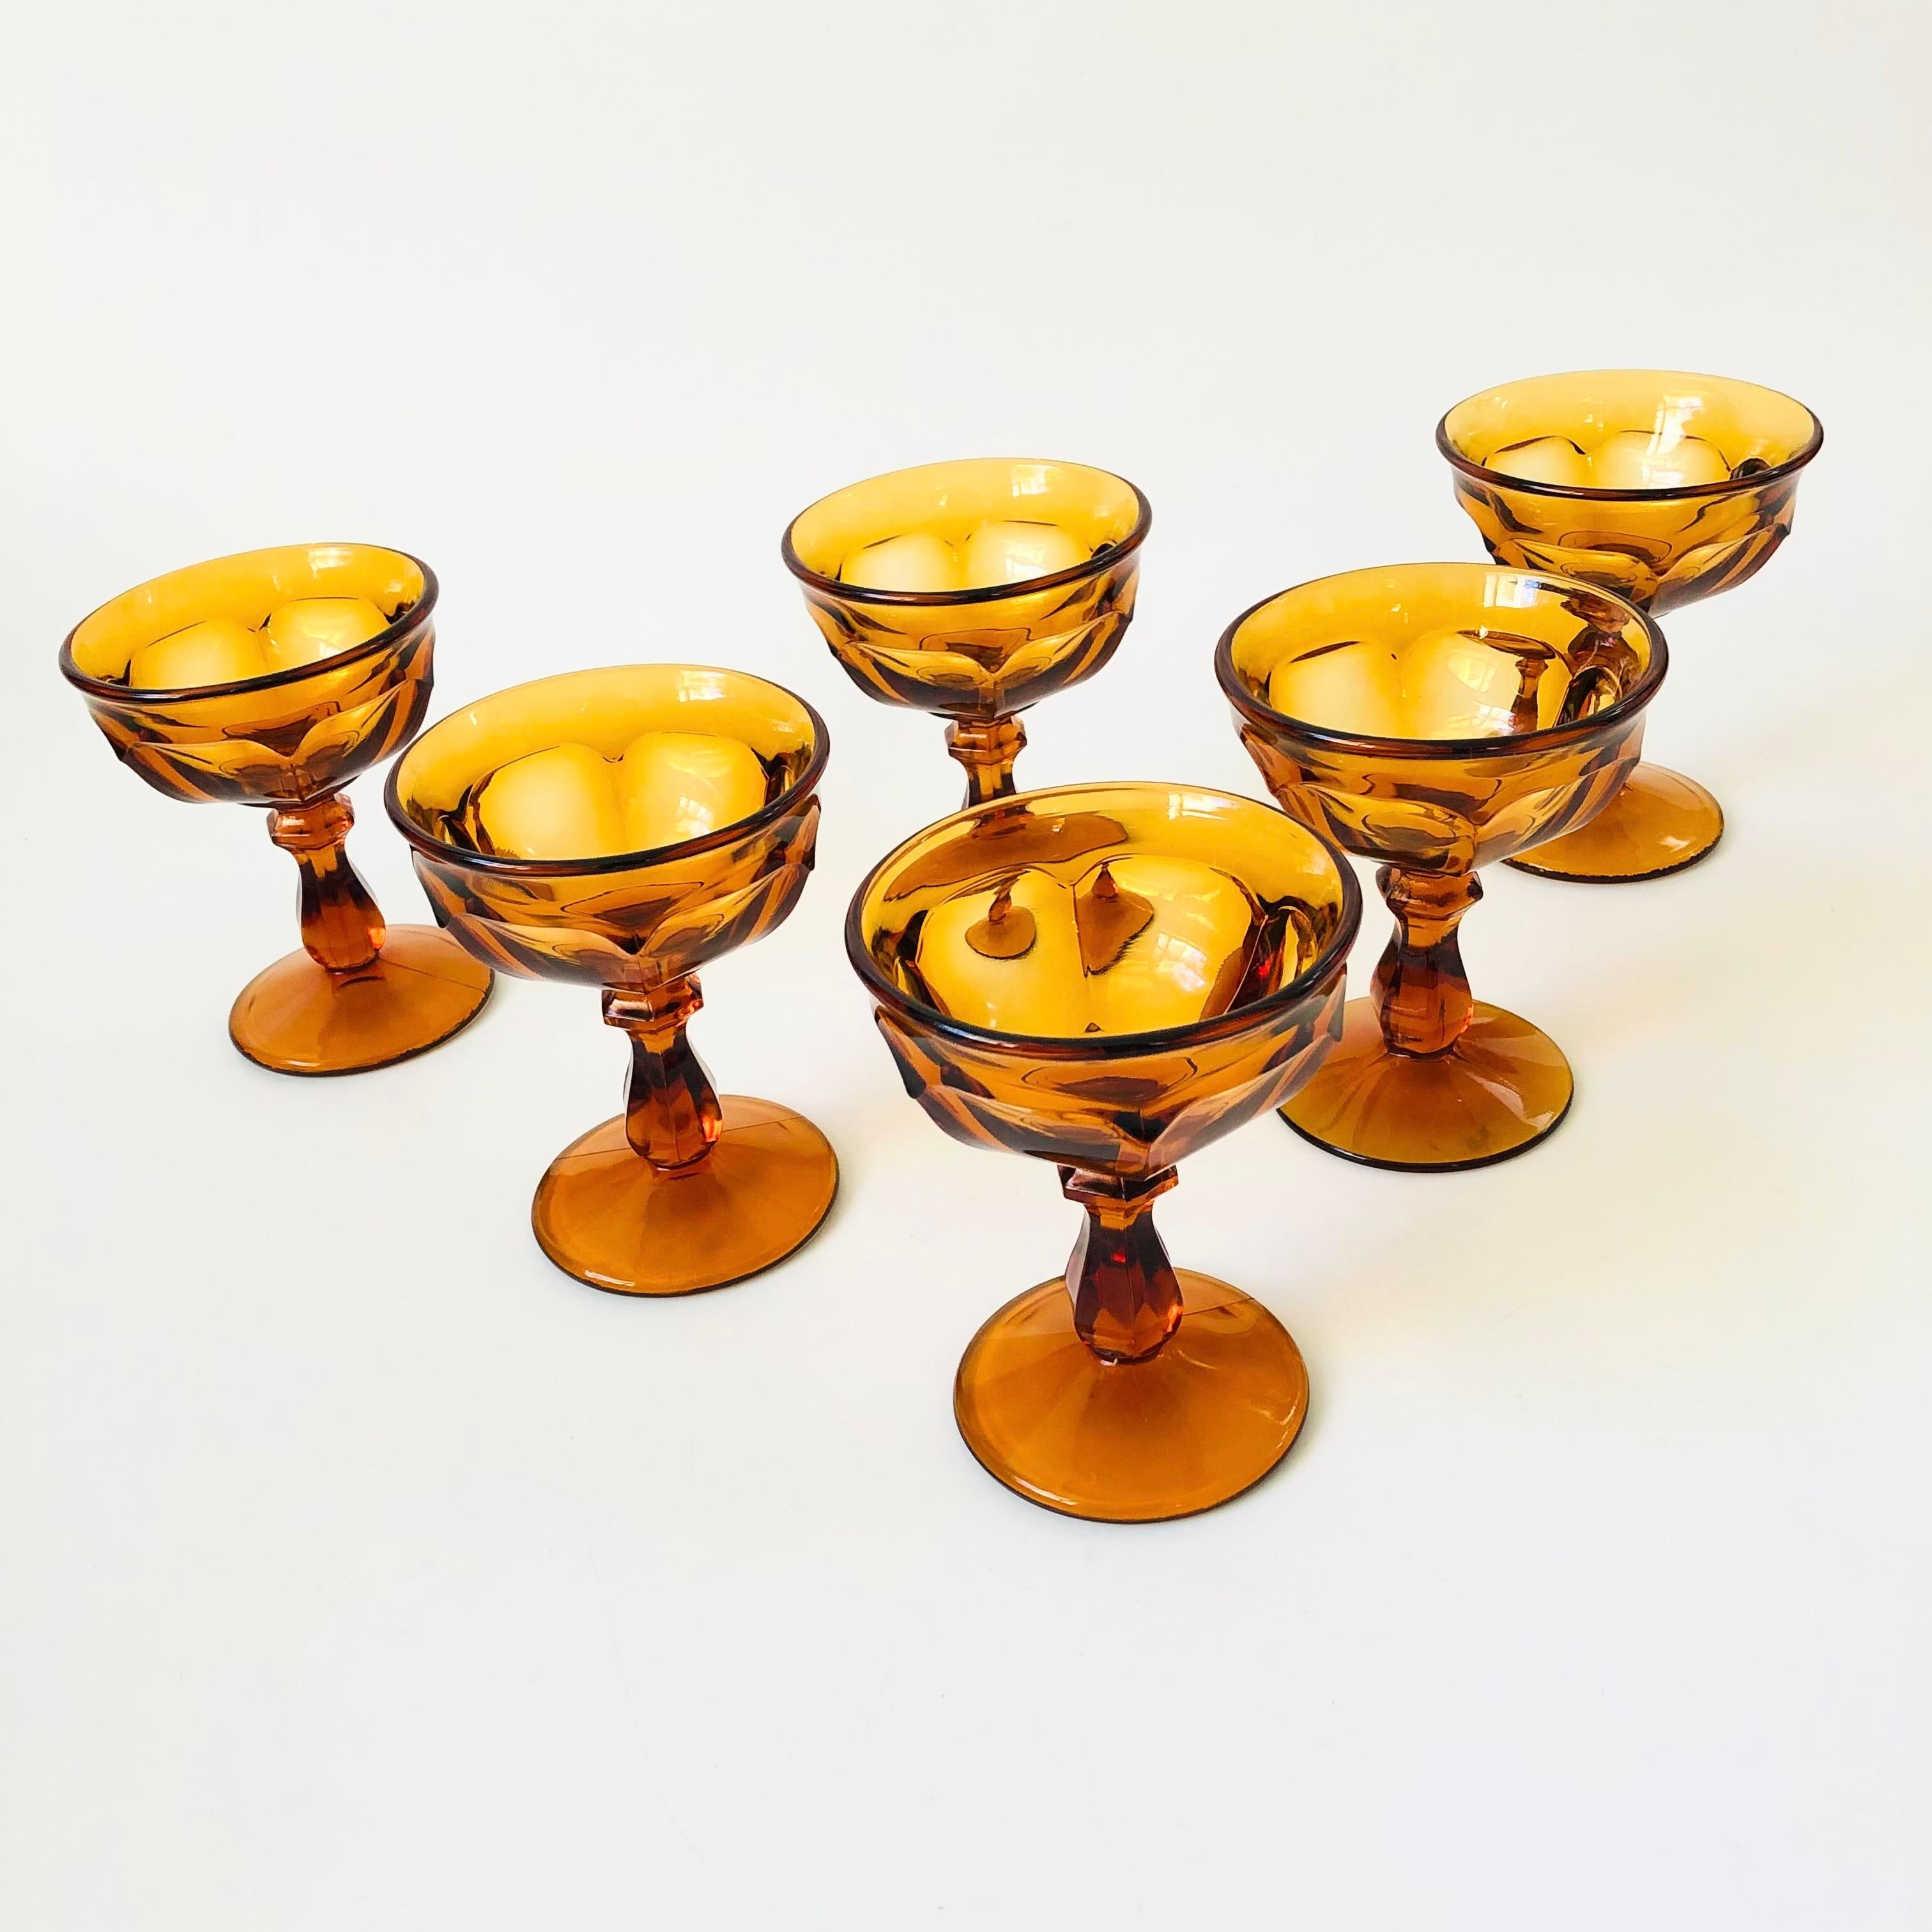 A set of 6 gorgeous amber coupe glasses. Made of thick glass with  lovely ornate design. Perfect for champagne or cocktails.

